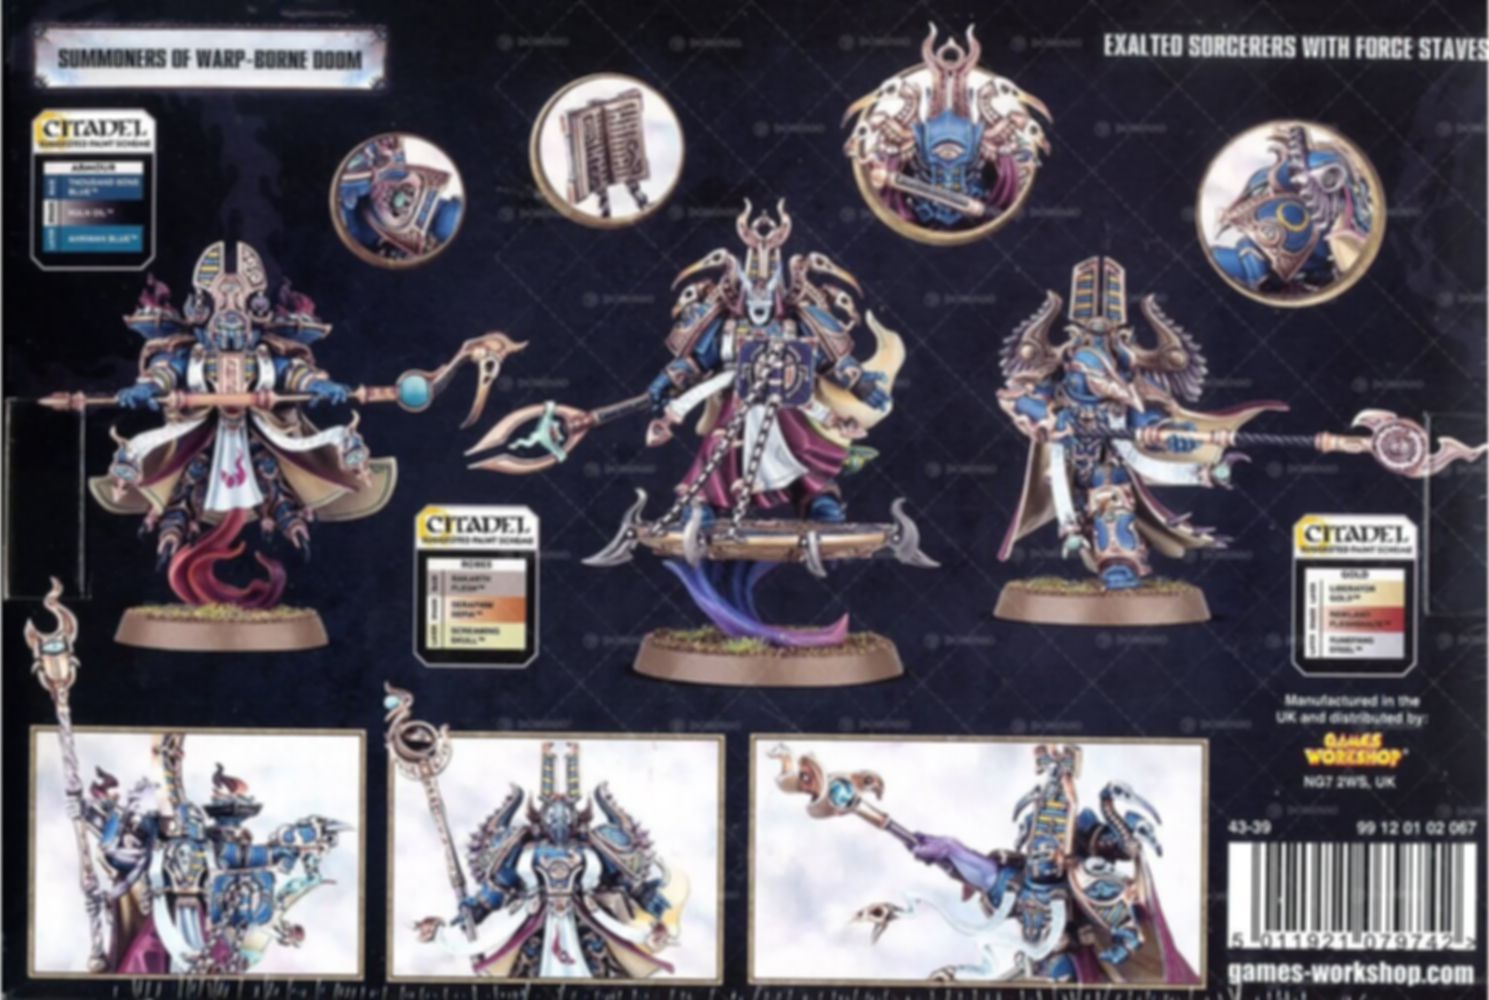 Warhammer 40,000 Chaos Heretic Astartes Thousand Sons: Exalted Sorcerers torna a scatola